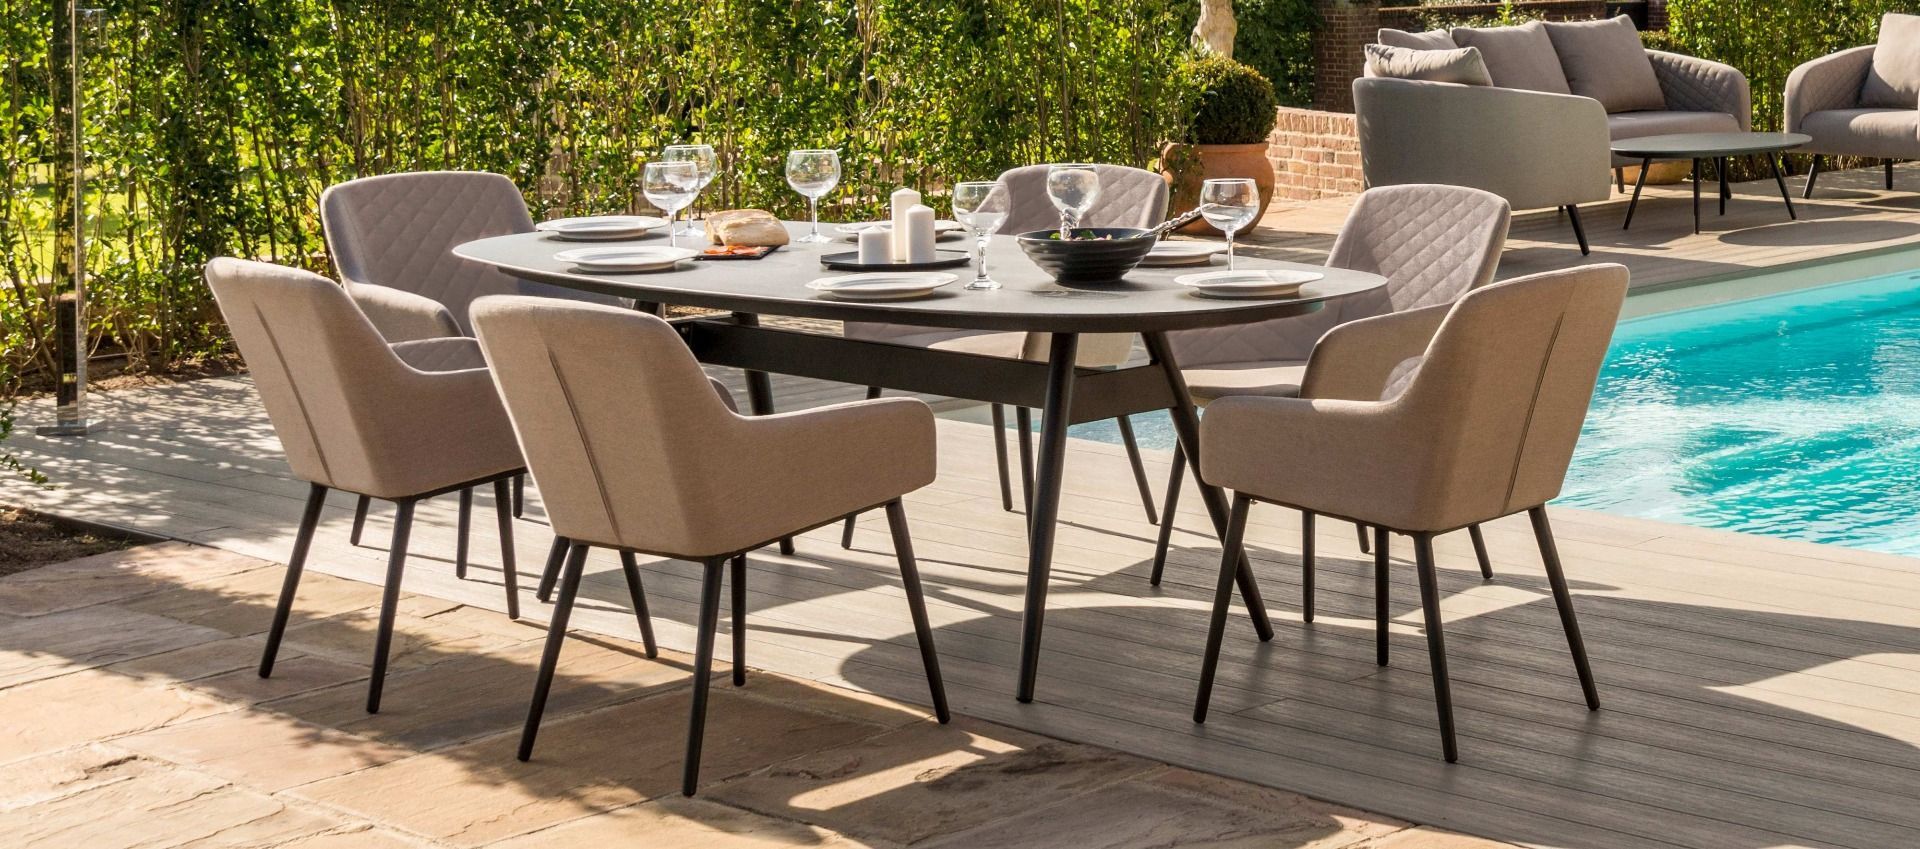 Zest 6 Seat Oval Outdoor Fabric Dining Set (Taupe) *BRAND NEW* - Image 2 of 5